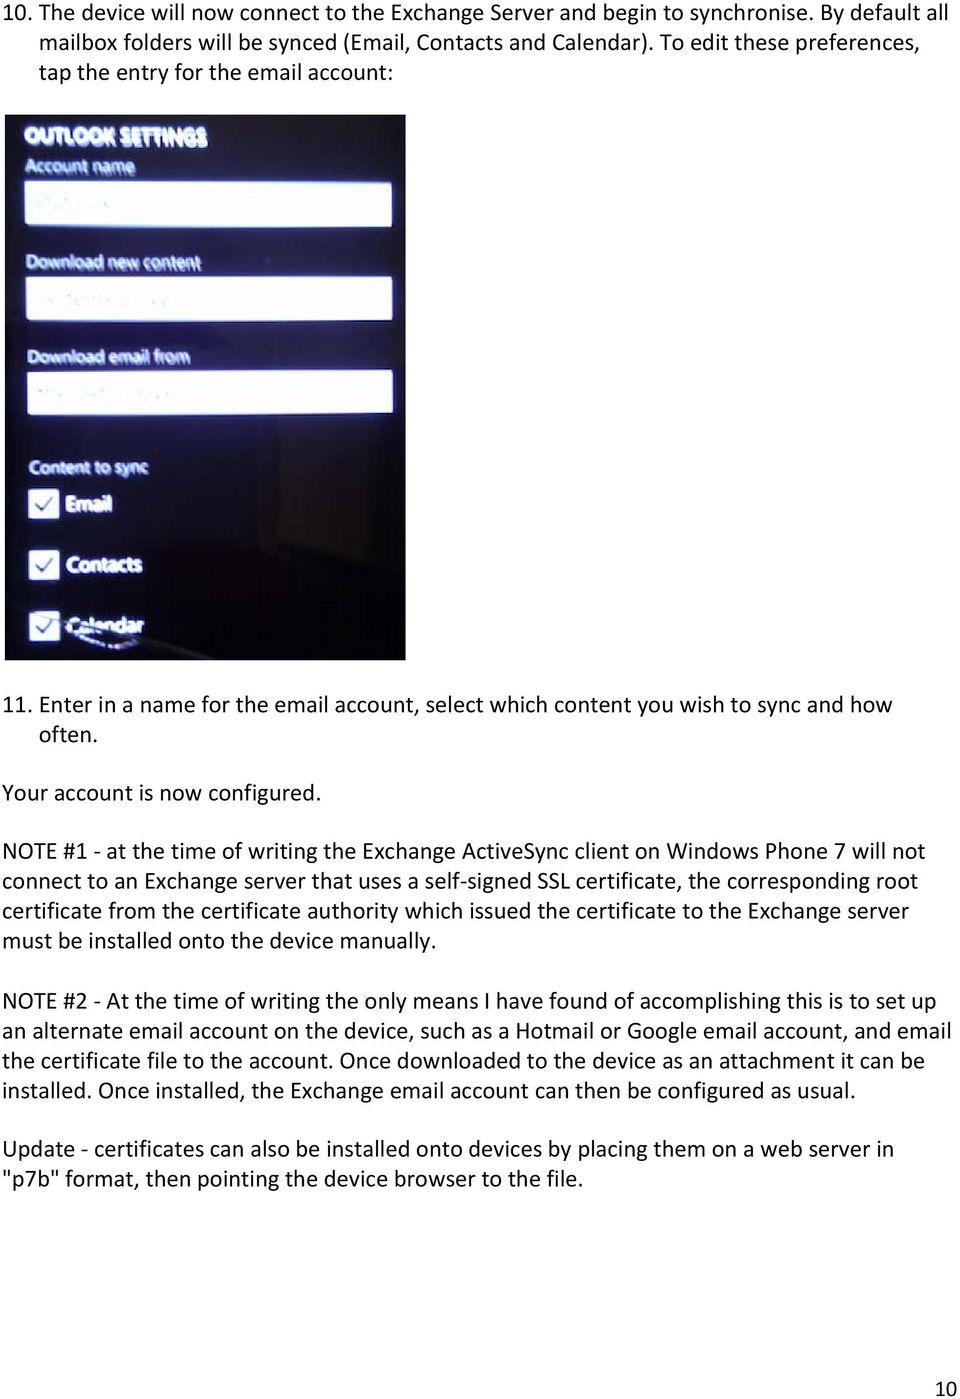 NOTE #1 at the time of writing the Exchange ActiveSync client on Windows Phone 7 will not connect to an Exchange server that uses a self signed SSL certificate, the corresponding root certificate